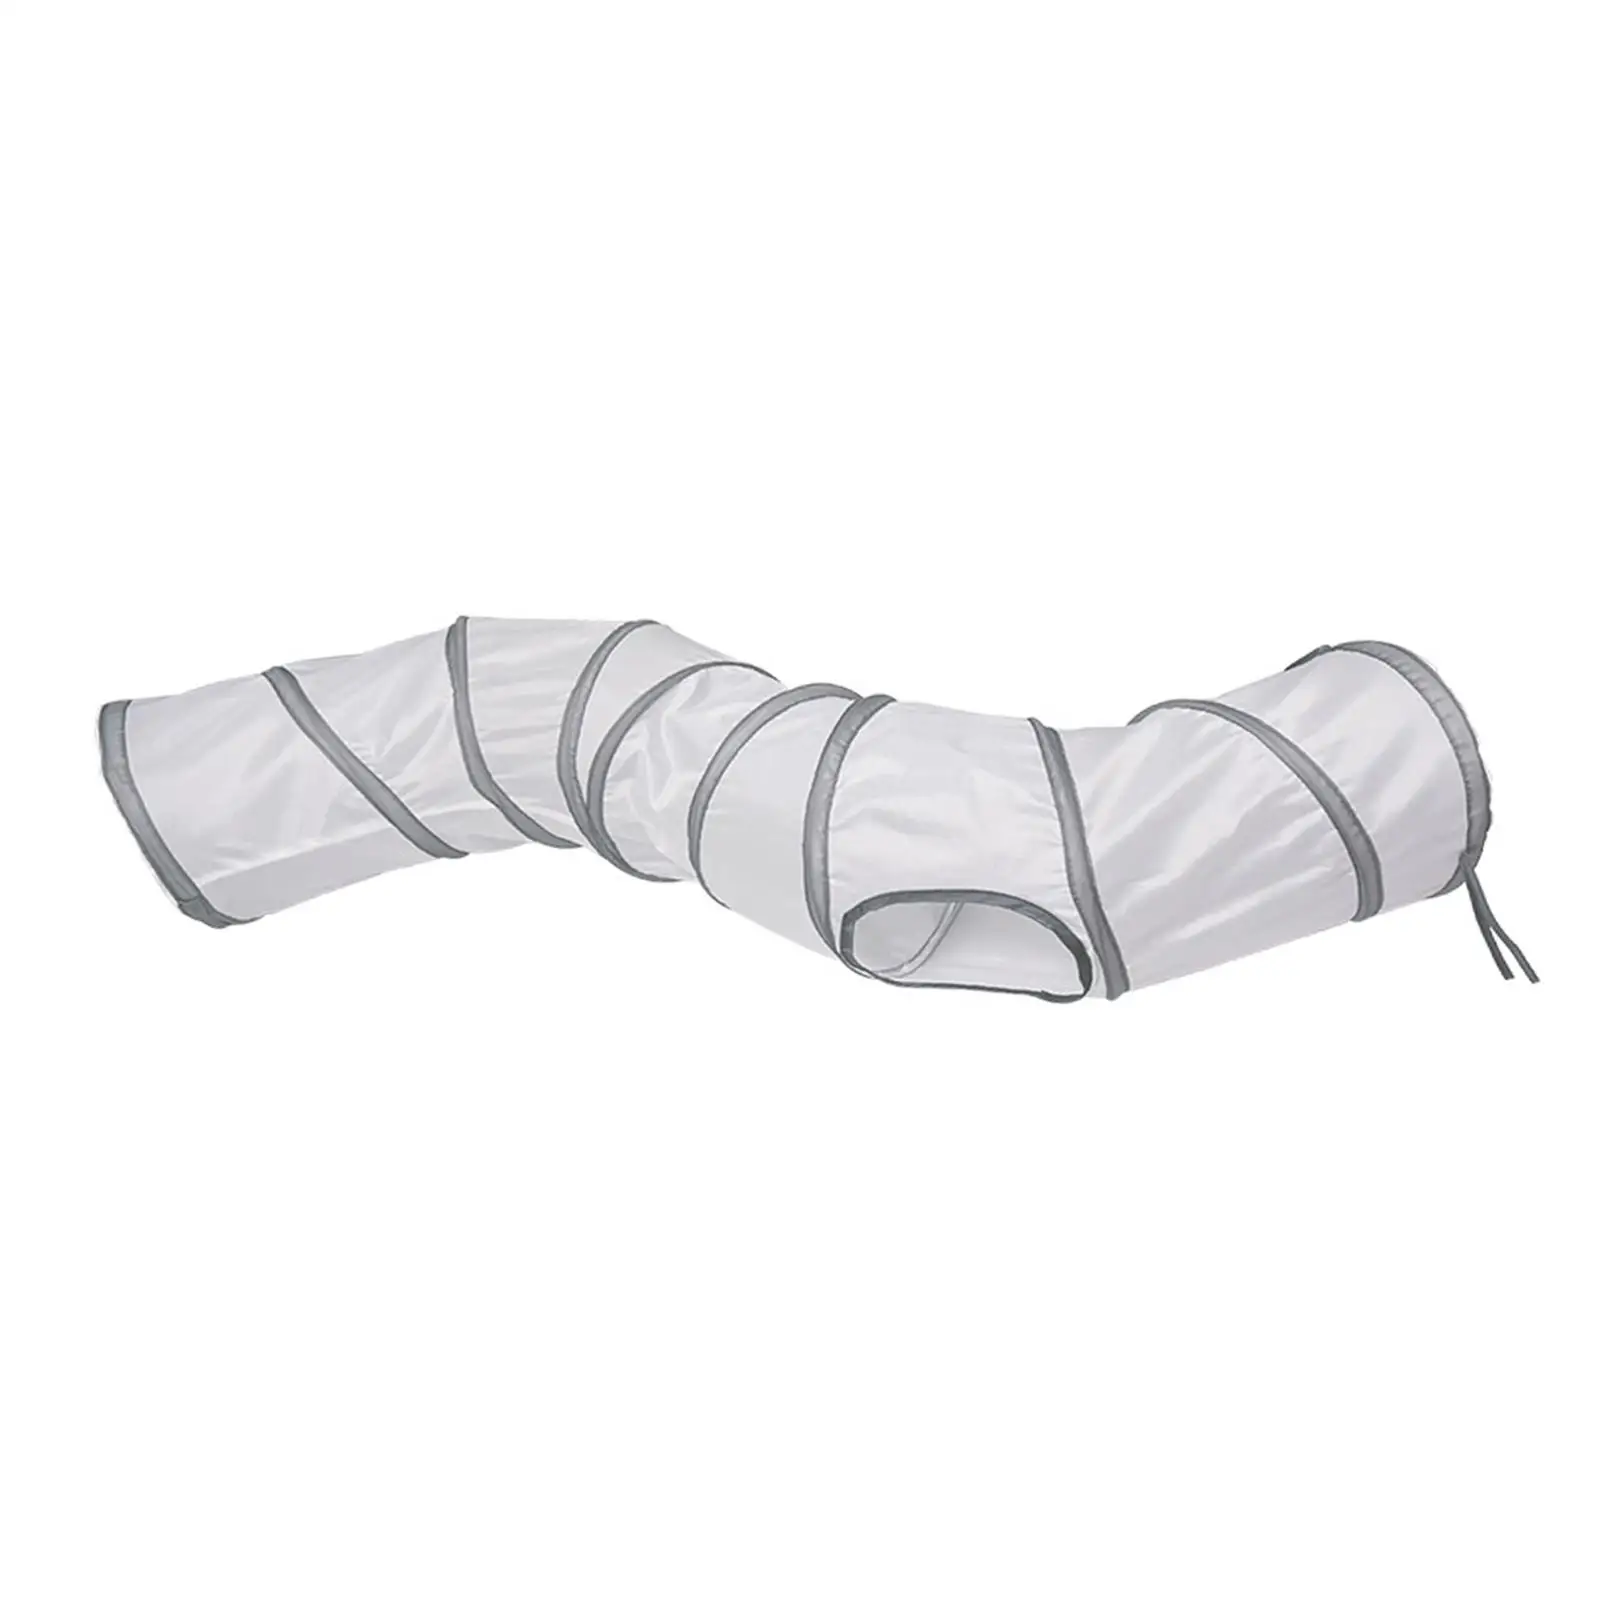 Foldable Cat Tunnel Tube House Portable Interactive Indoor Durable Pet Toys Tunnels for Bunny Kitten Training Exercising Hiding